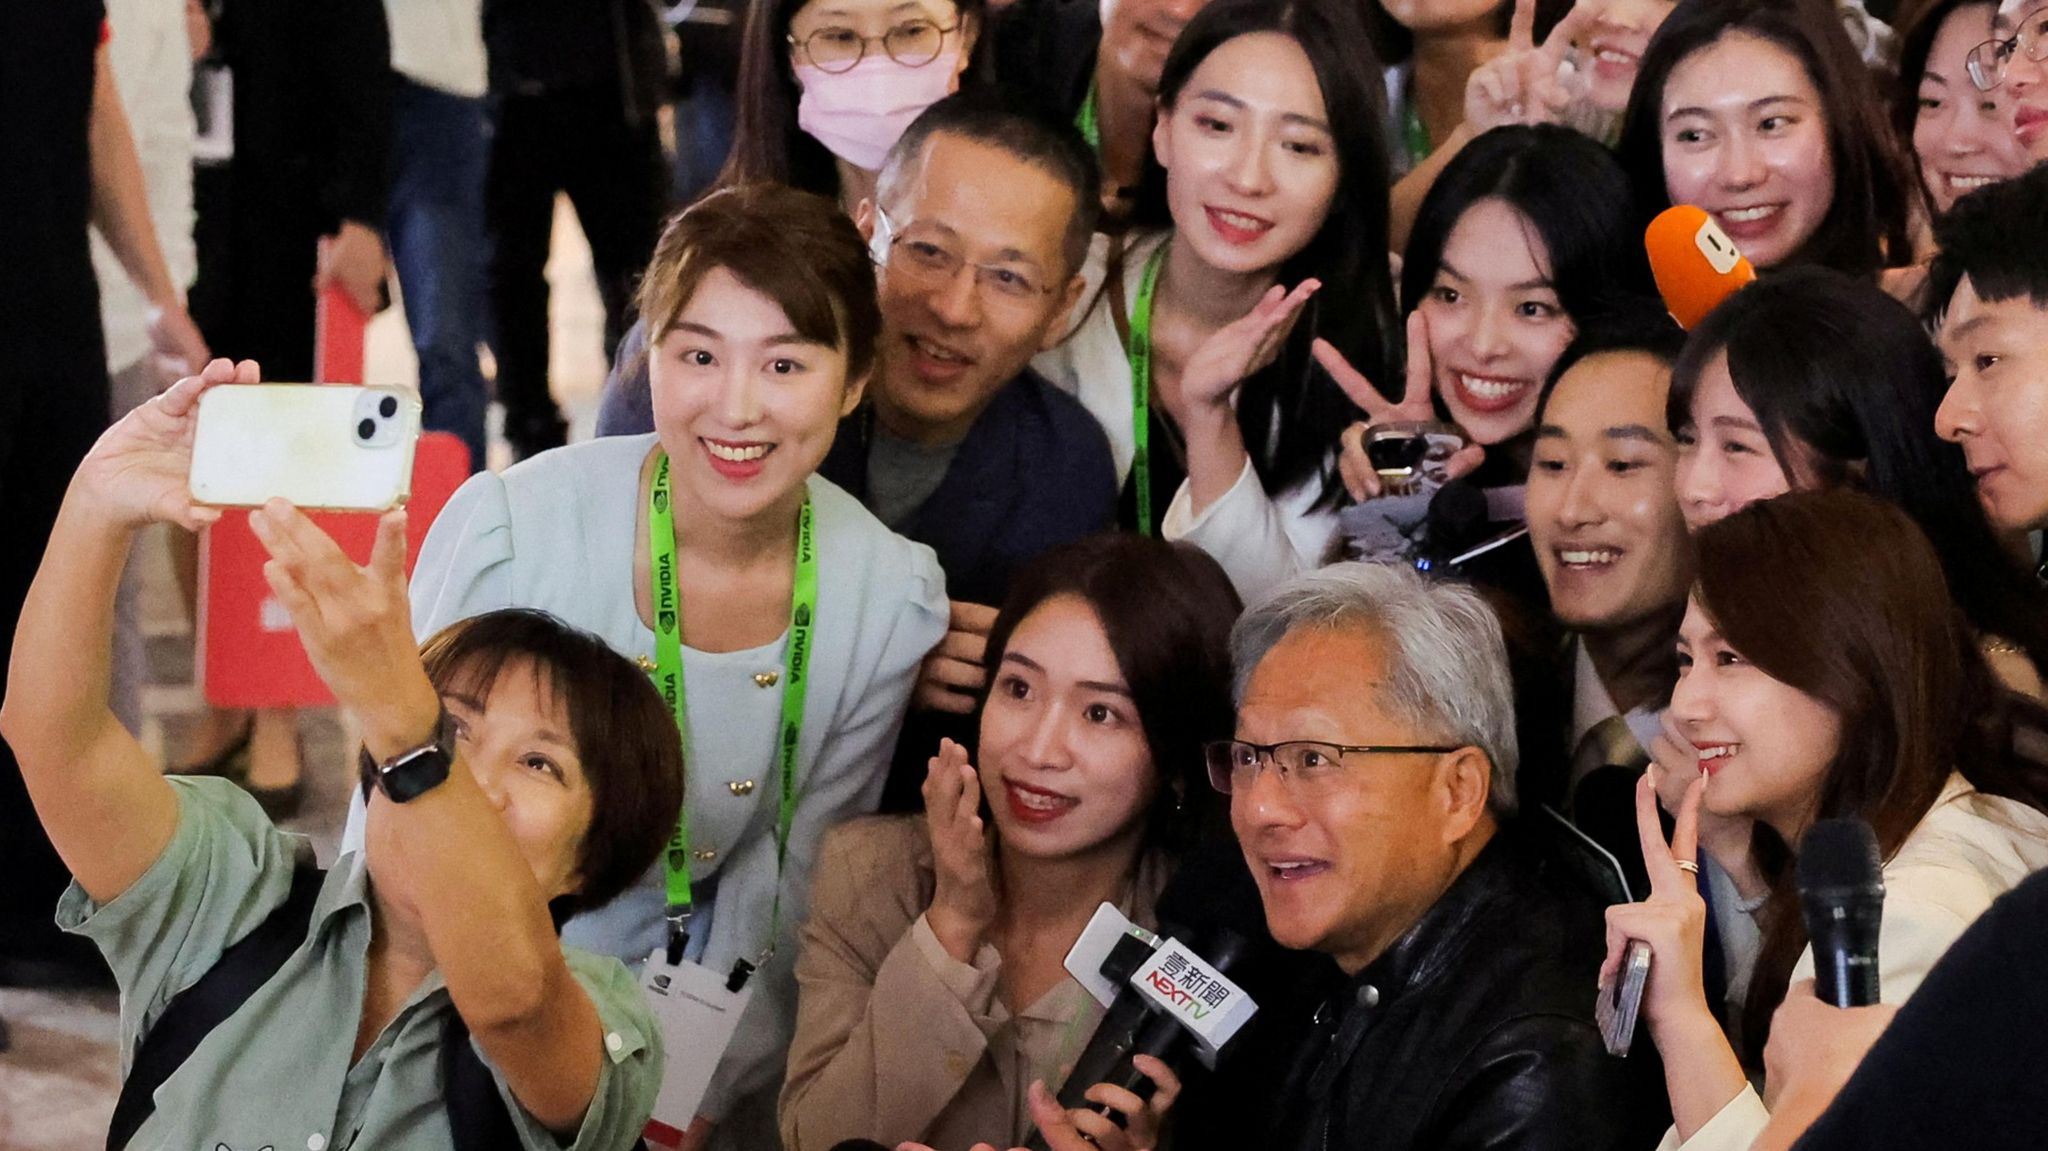 Nvidia CEO Jensen Huang poses for a selfie with members of the media at COMPUTEX forum in Taipei.